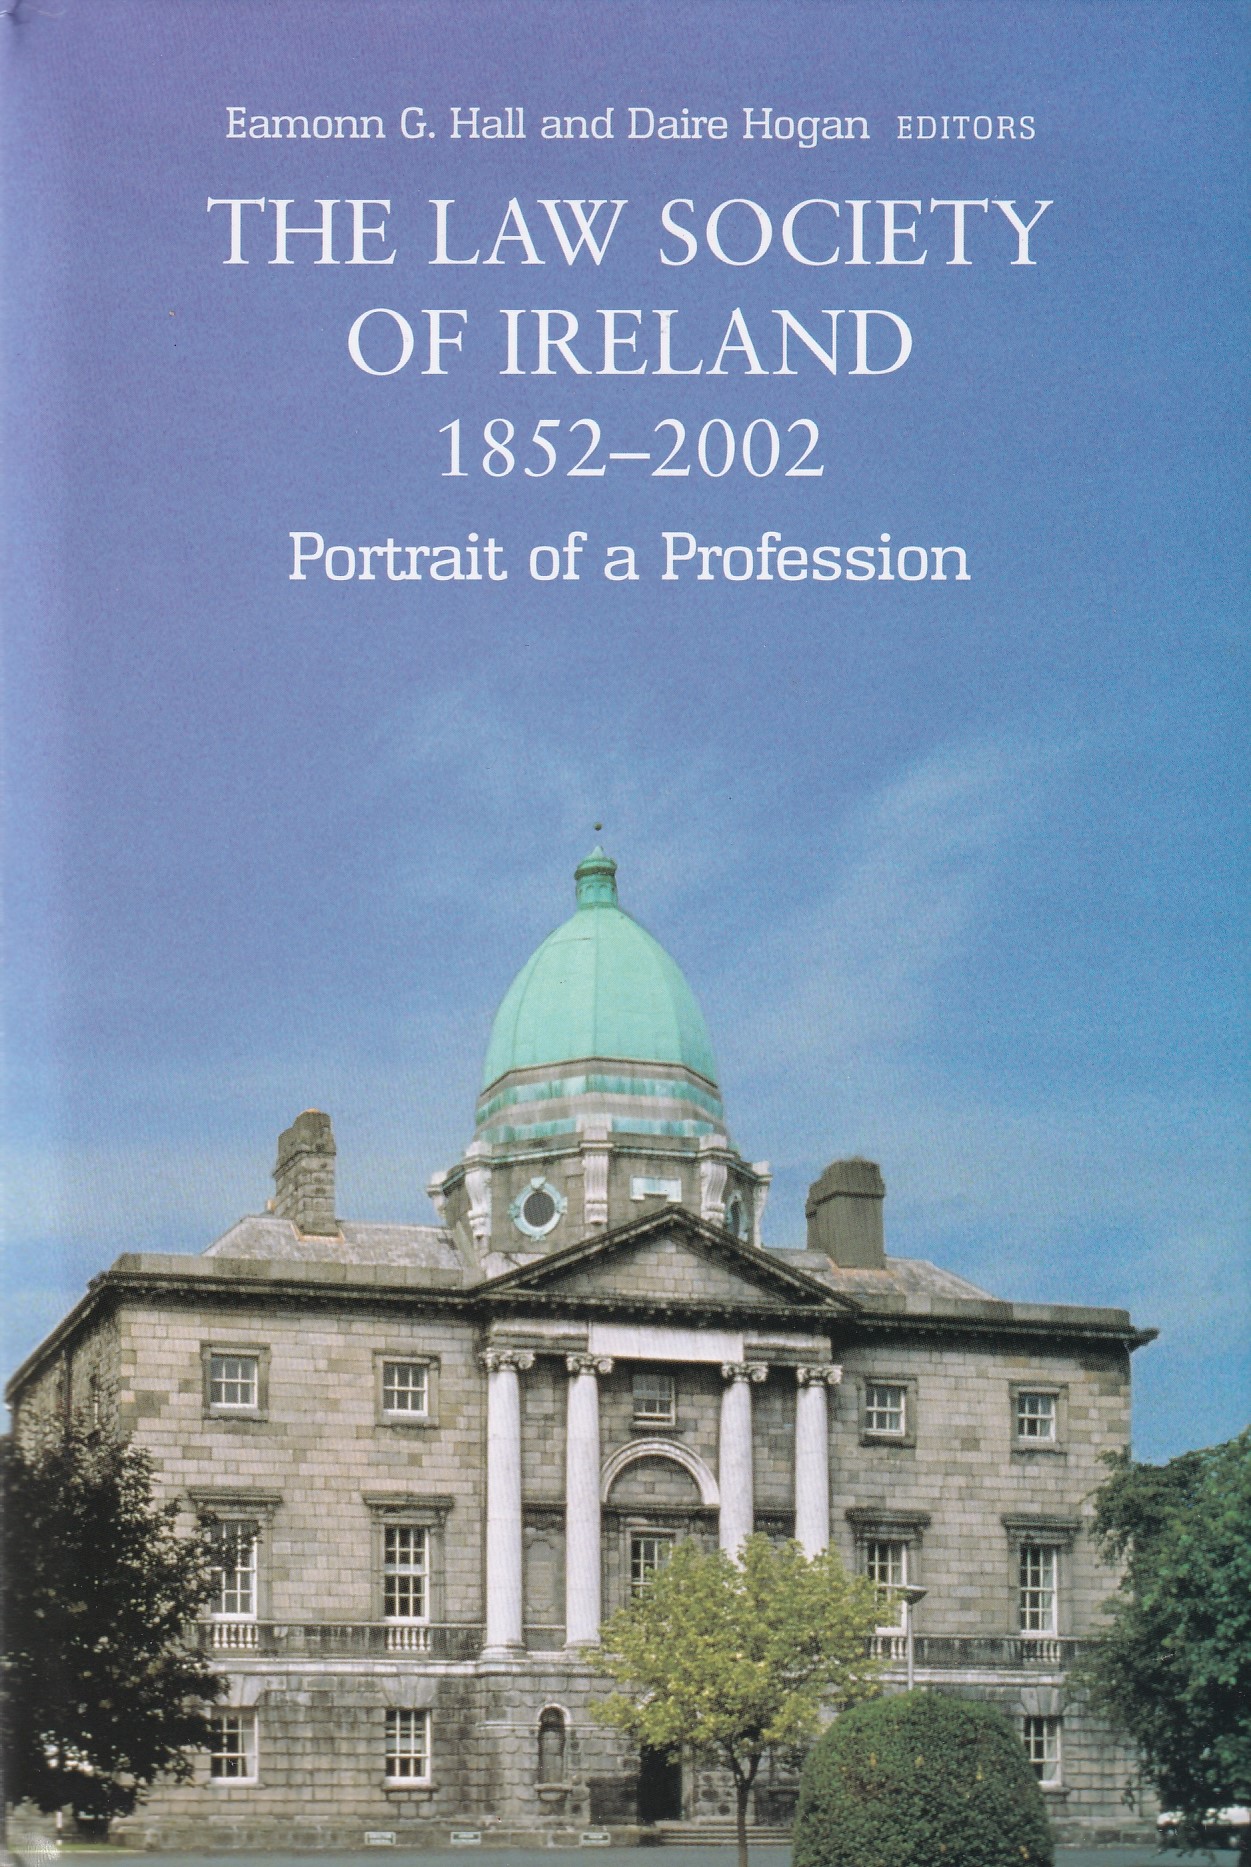 The Law Society of Ireland, 1852-2002: Portrait of a Profession | Ed. Eamonn G. Hall and Daire Hogan | Charlie Byrne's